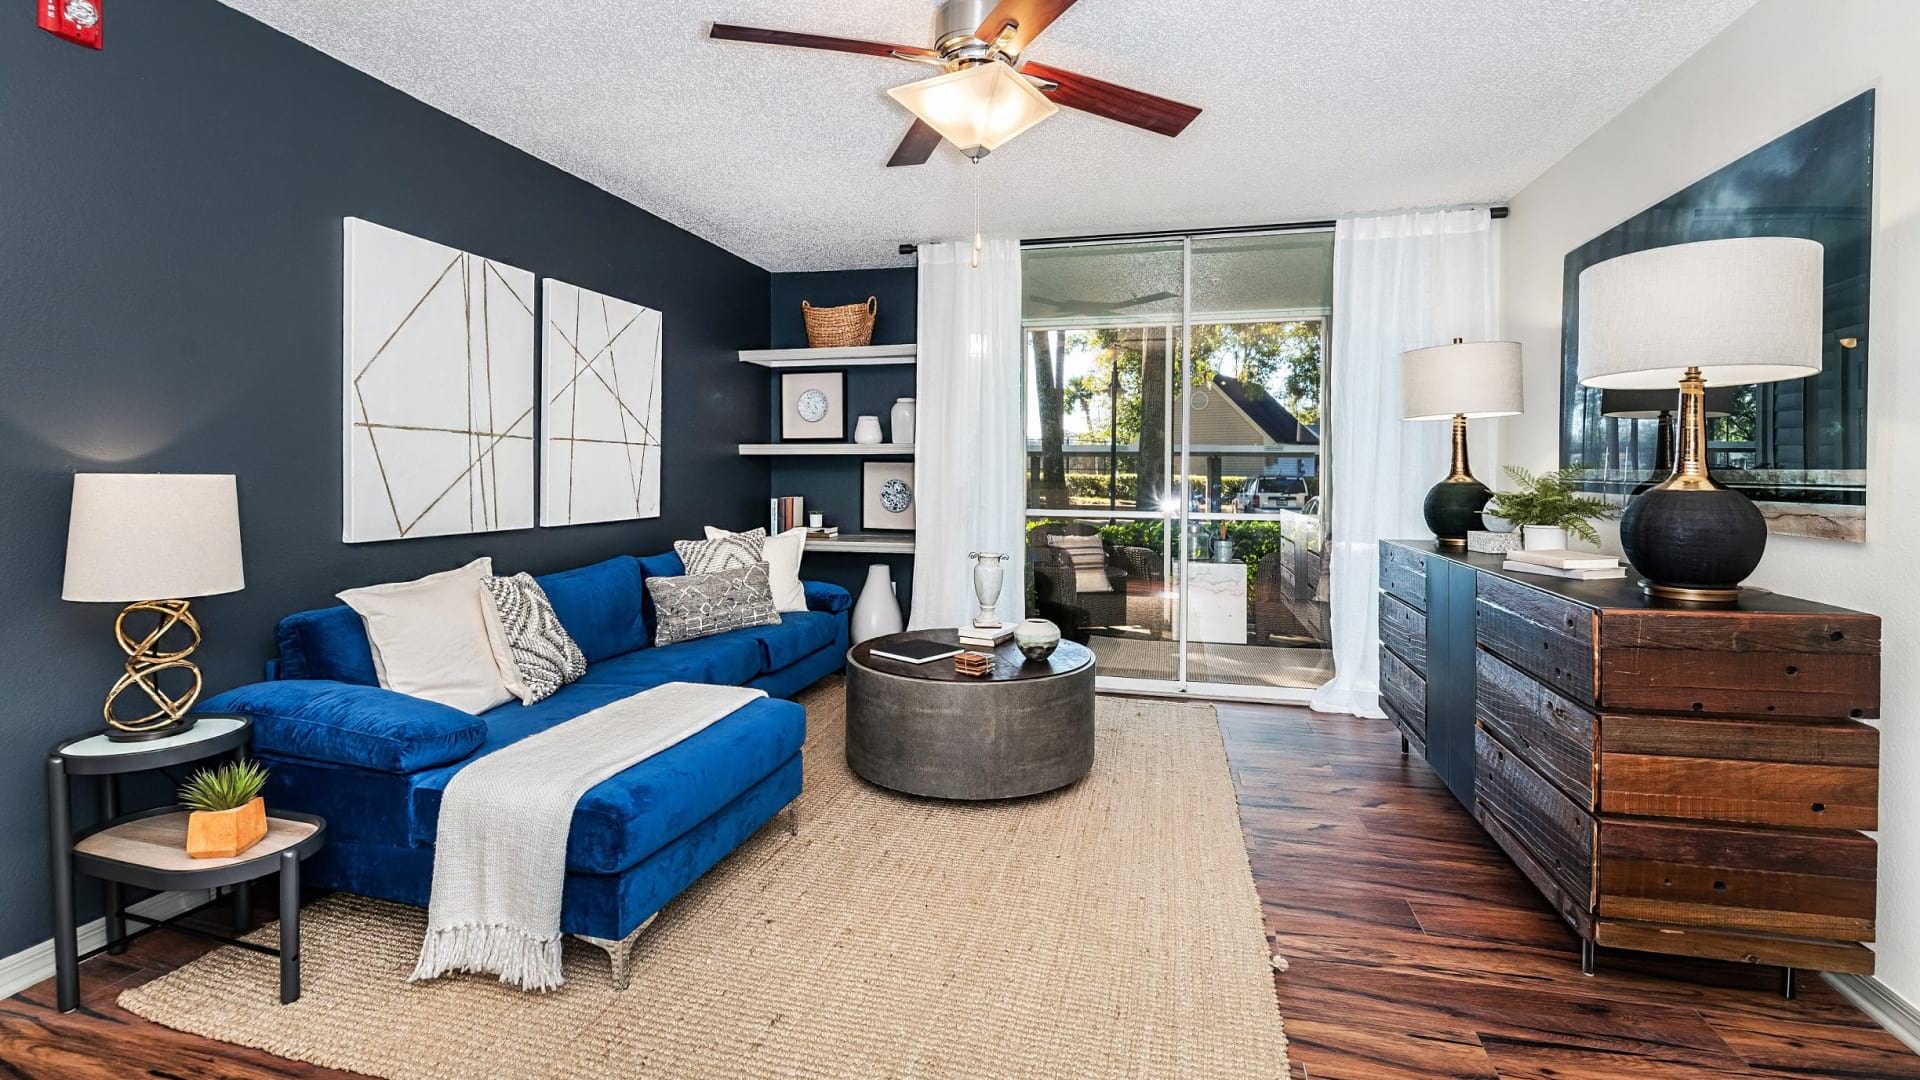 Luxurious Living Area at Our Apartments Near Winter Park, FL with Designer Decor